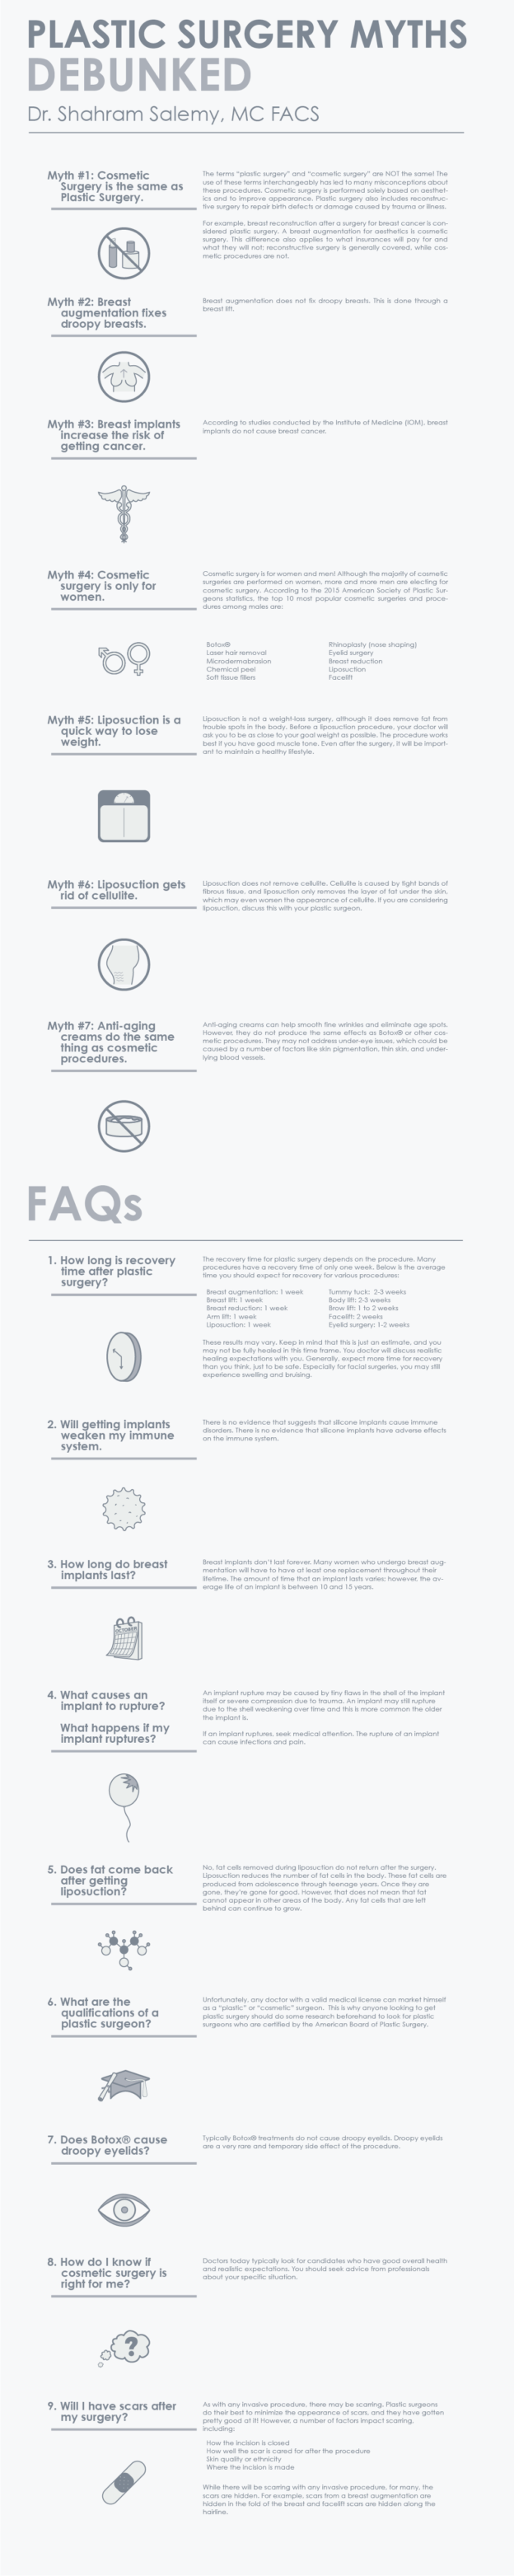 An infographic on the Facts & Myths about Plastic Surgery procedures.